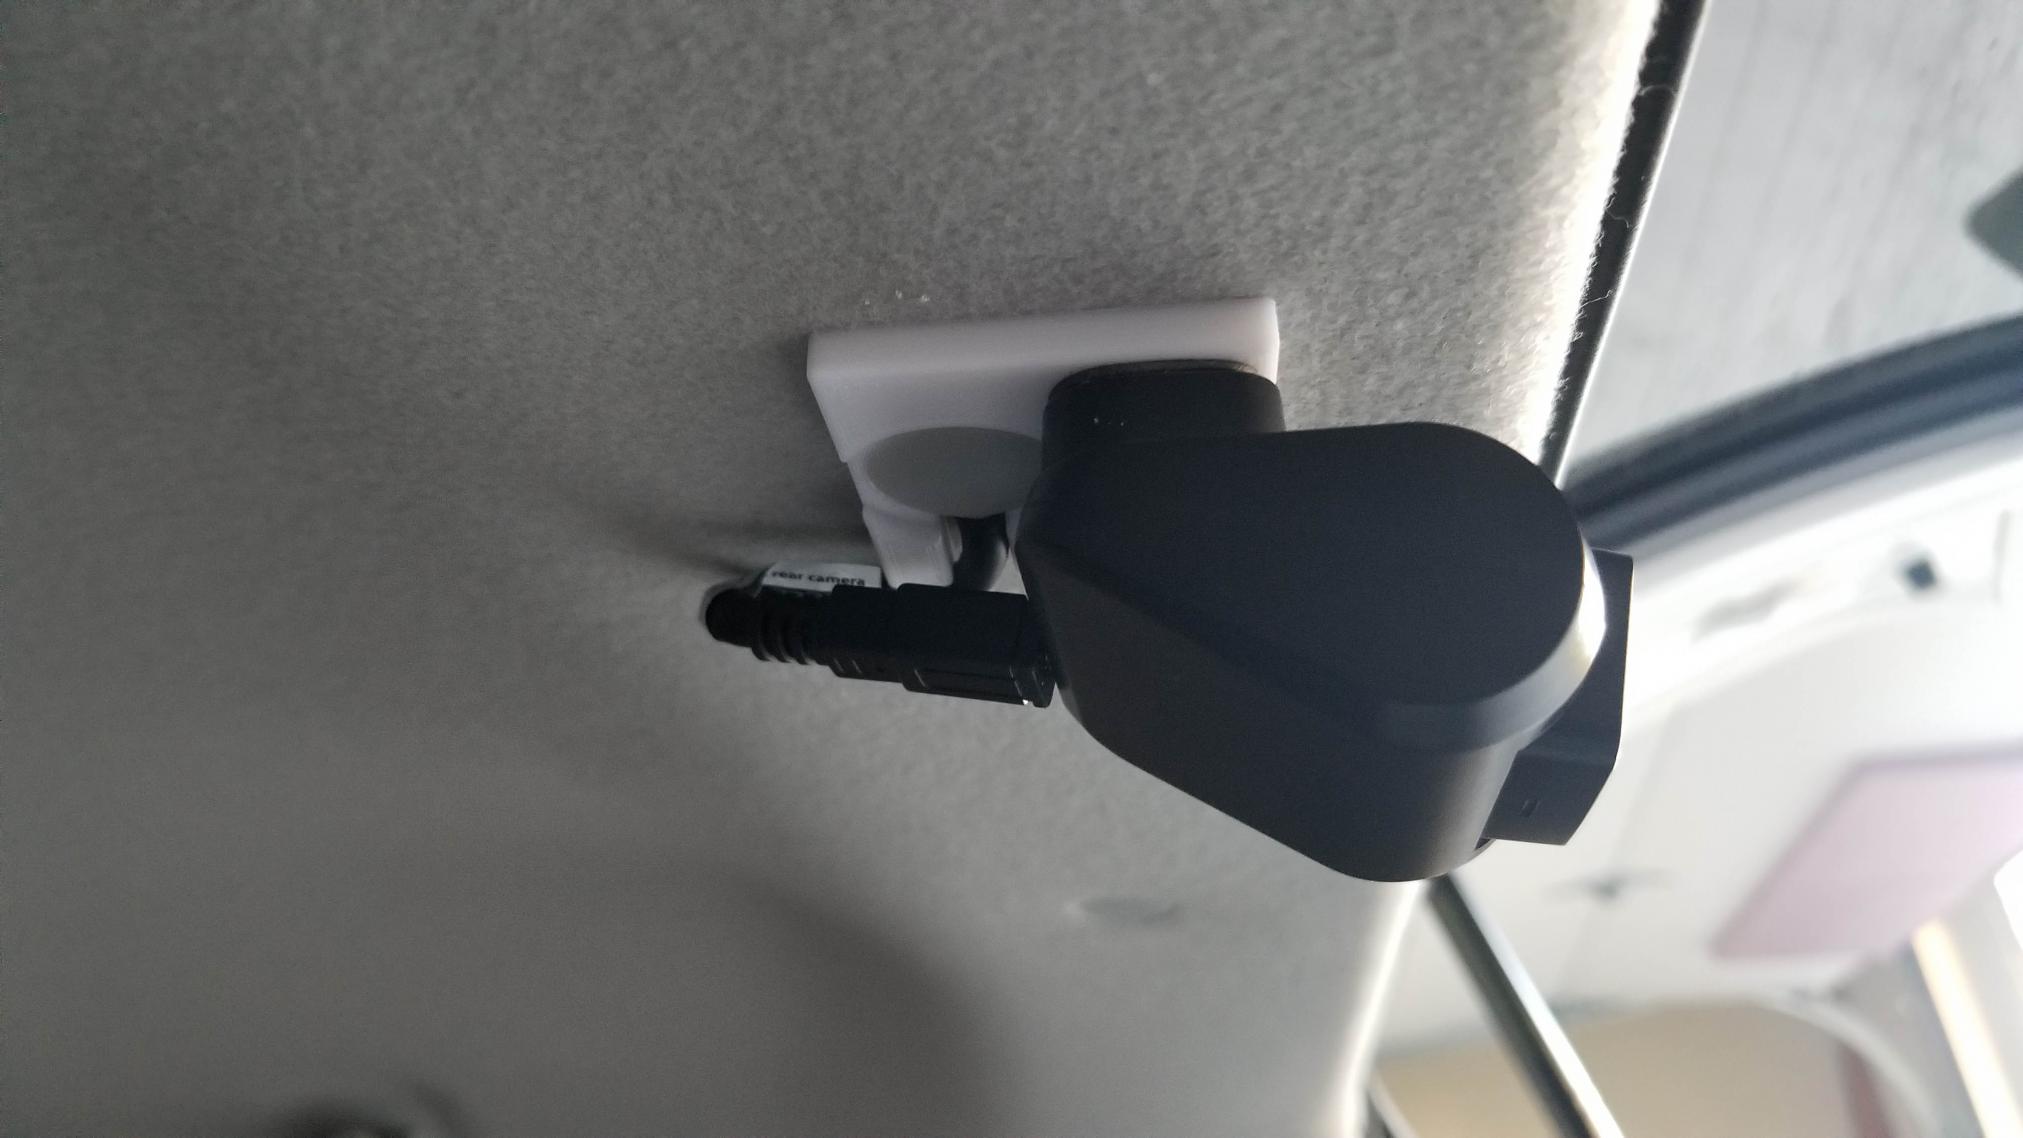 Another rear dash cam mount, 3d printed, link and pics included-20210910_171404-jpg